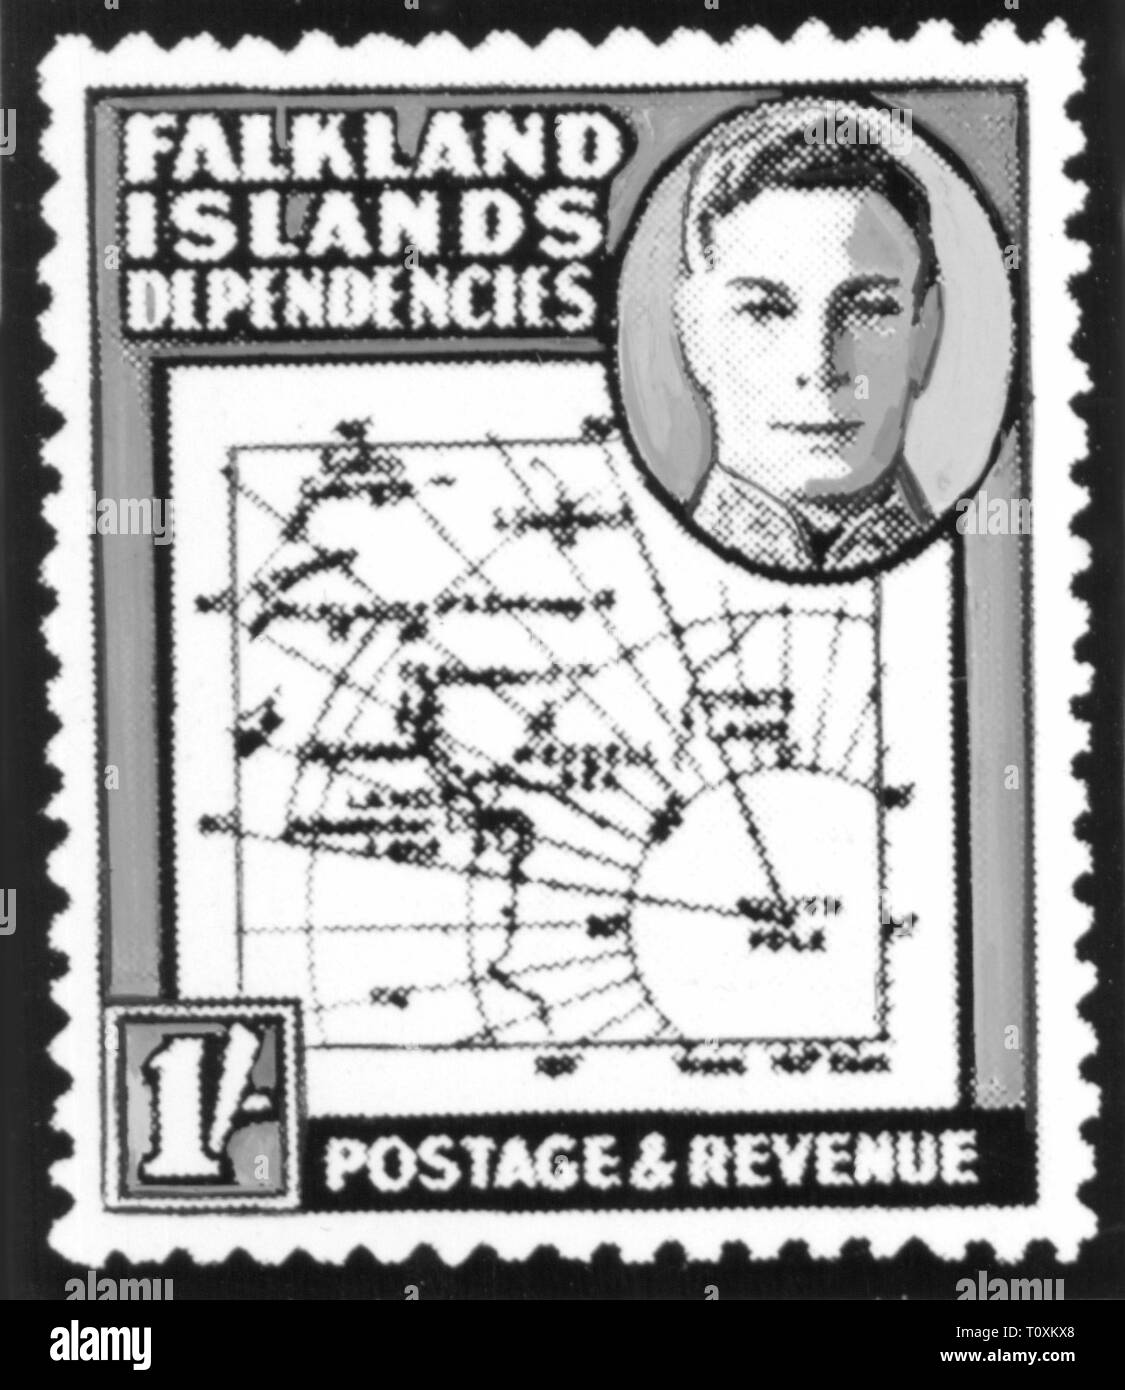 mail, postage stamps, Falkland Islands, 10 shilling postage and revenue stamp, portrait of King George VI, part of the Antarctic claim by Great Britain, date of issue: 1946, Additional-Rights-Clearance-Info-Not-Available Stock Photo